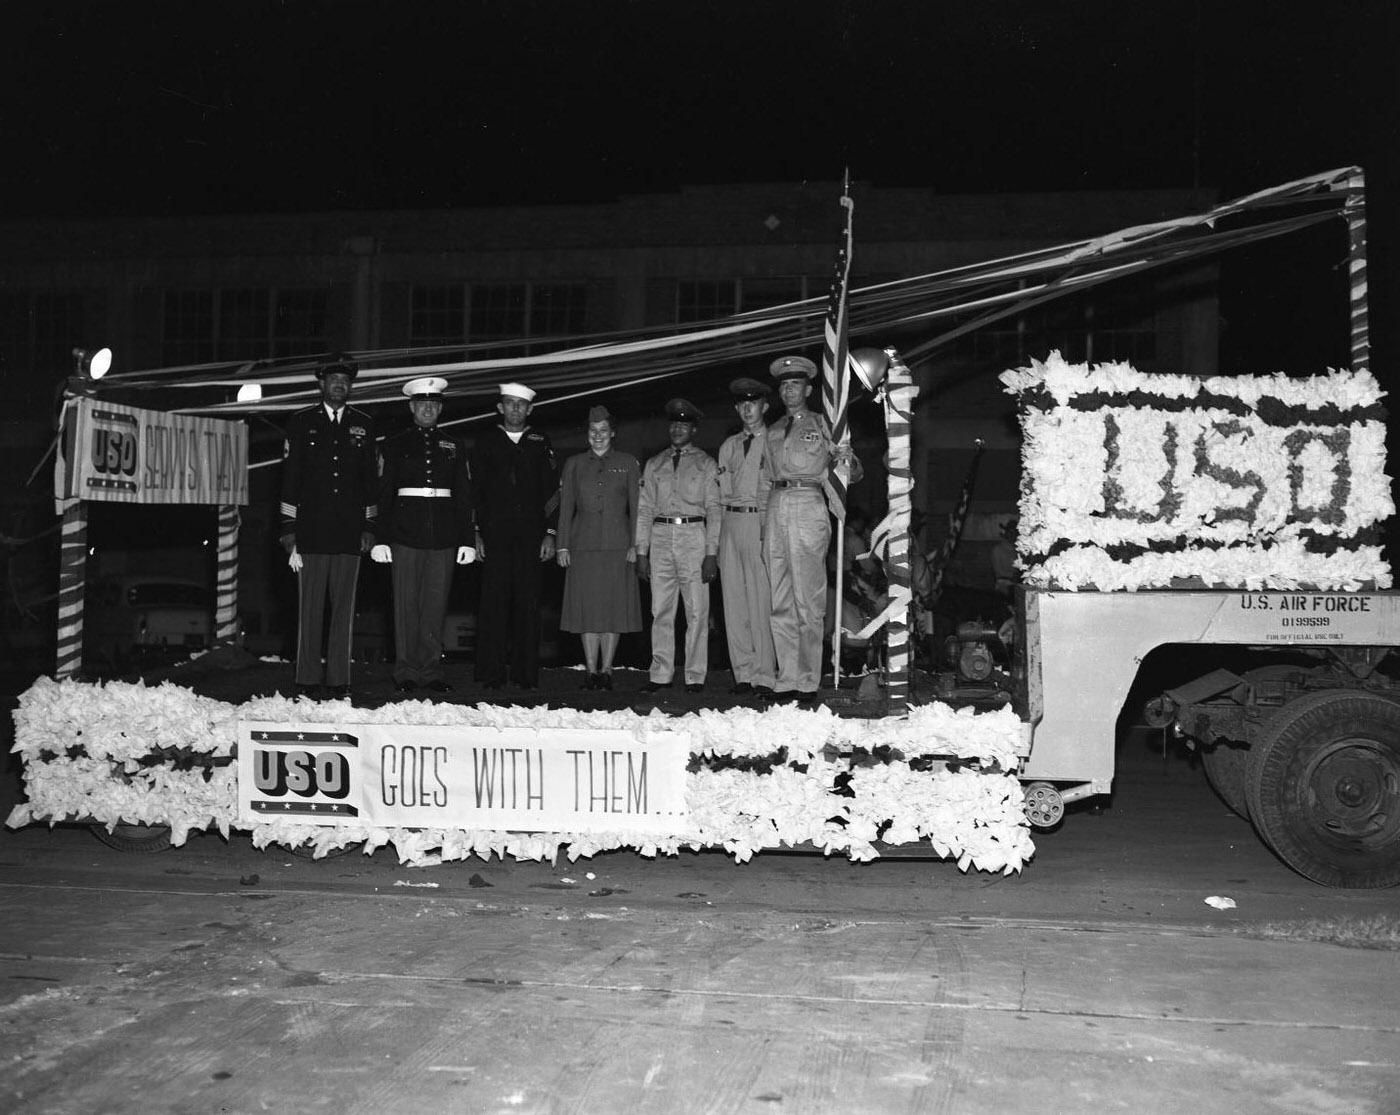 United Fund Parade with Military Personnel on USO Float, 1956.